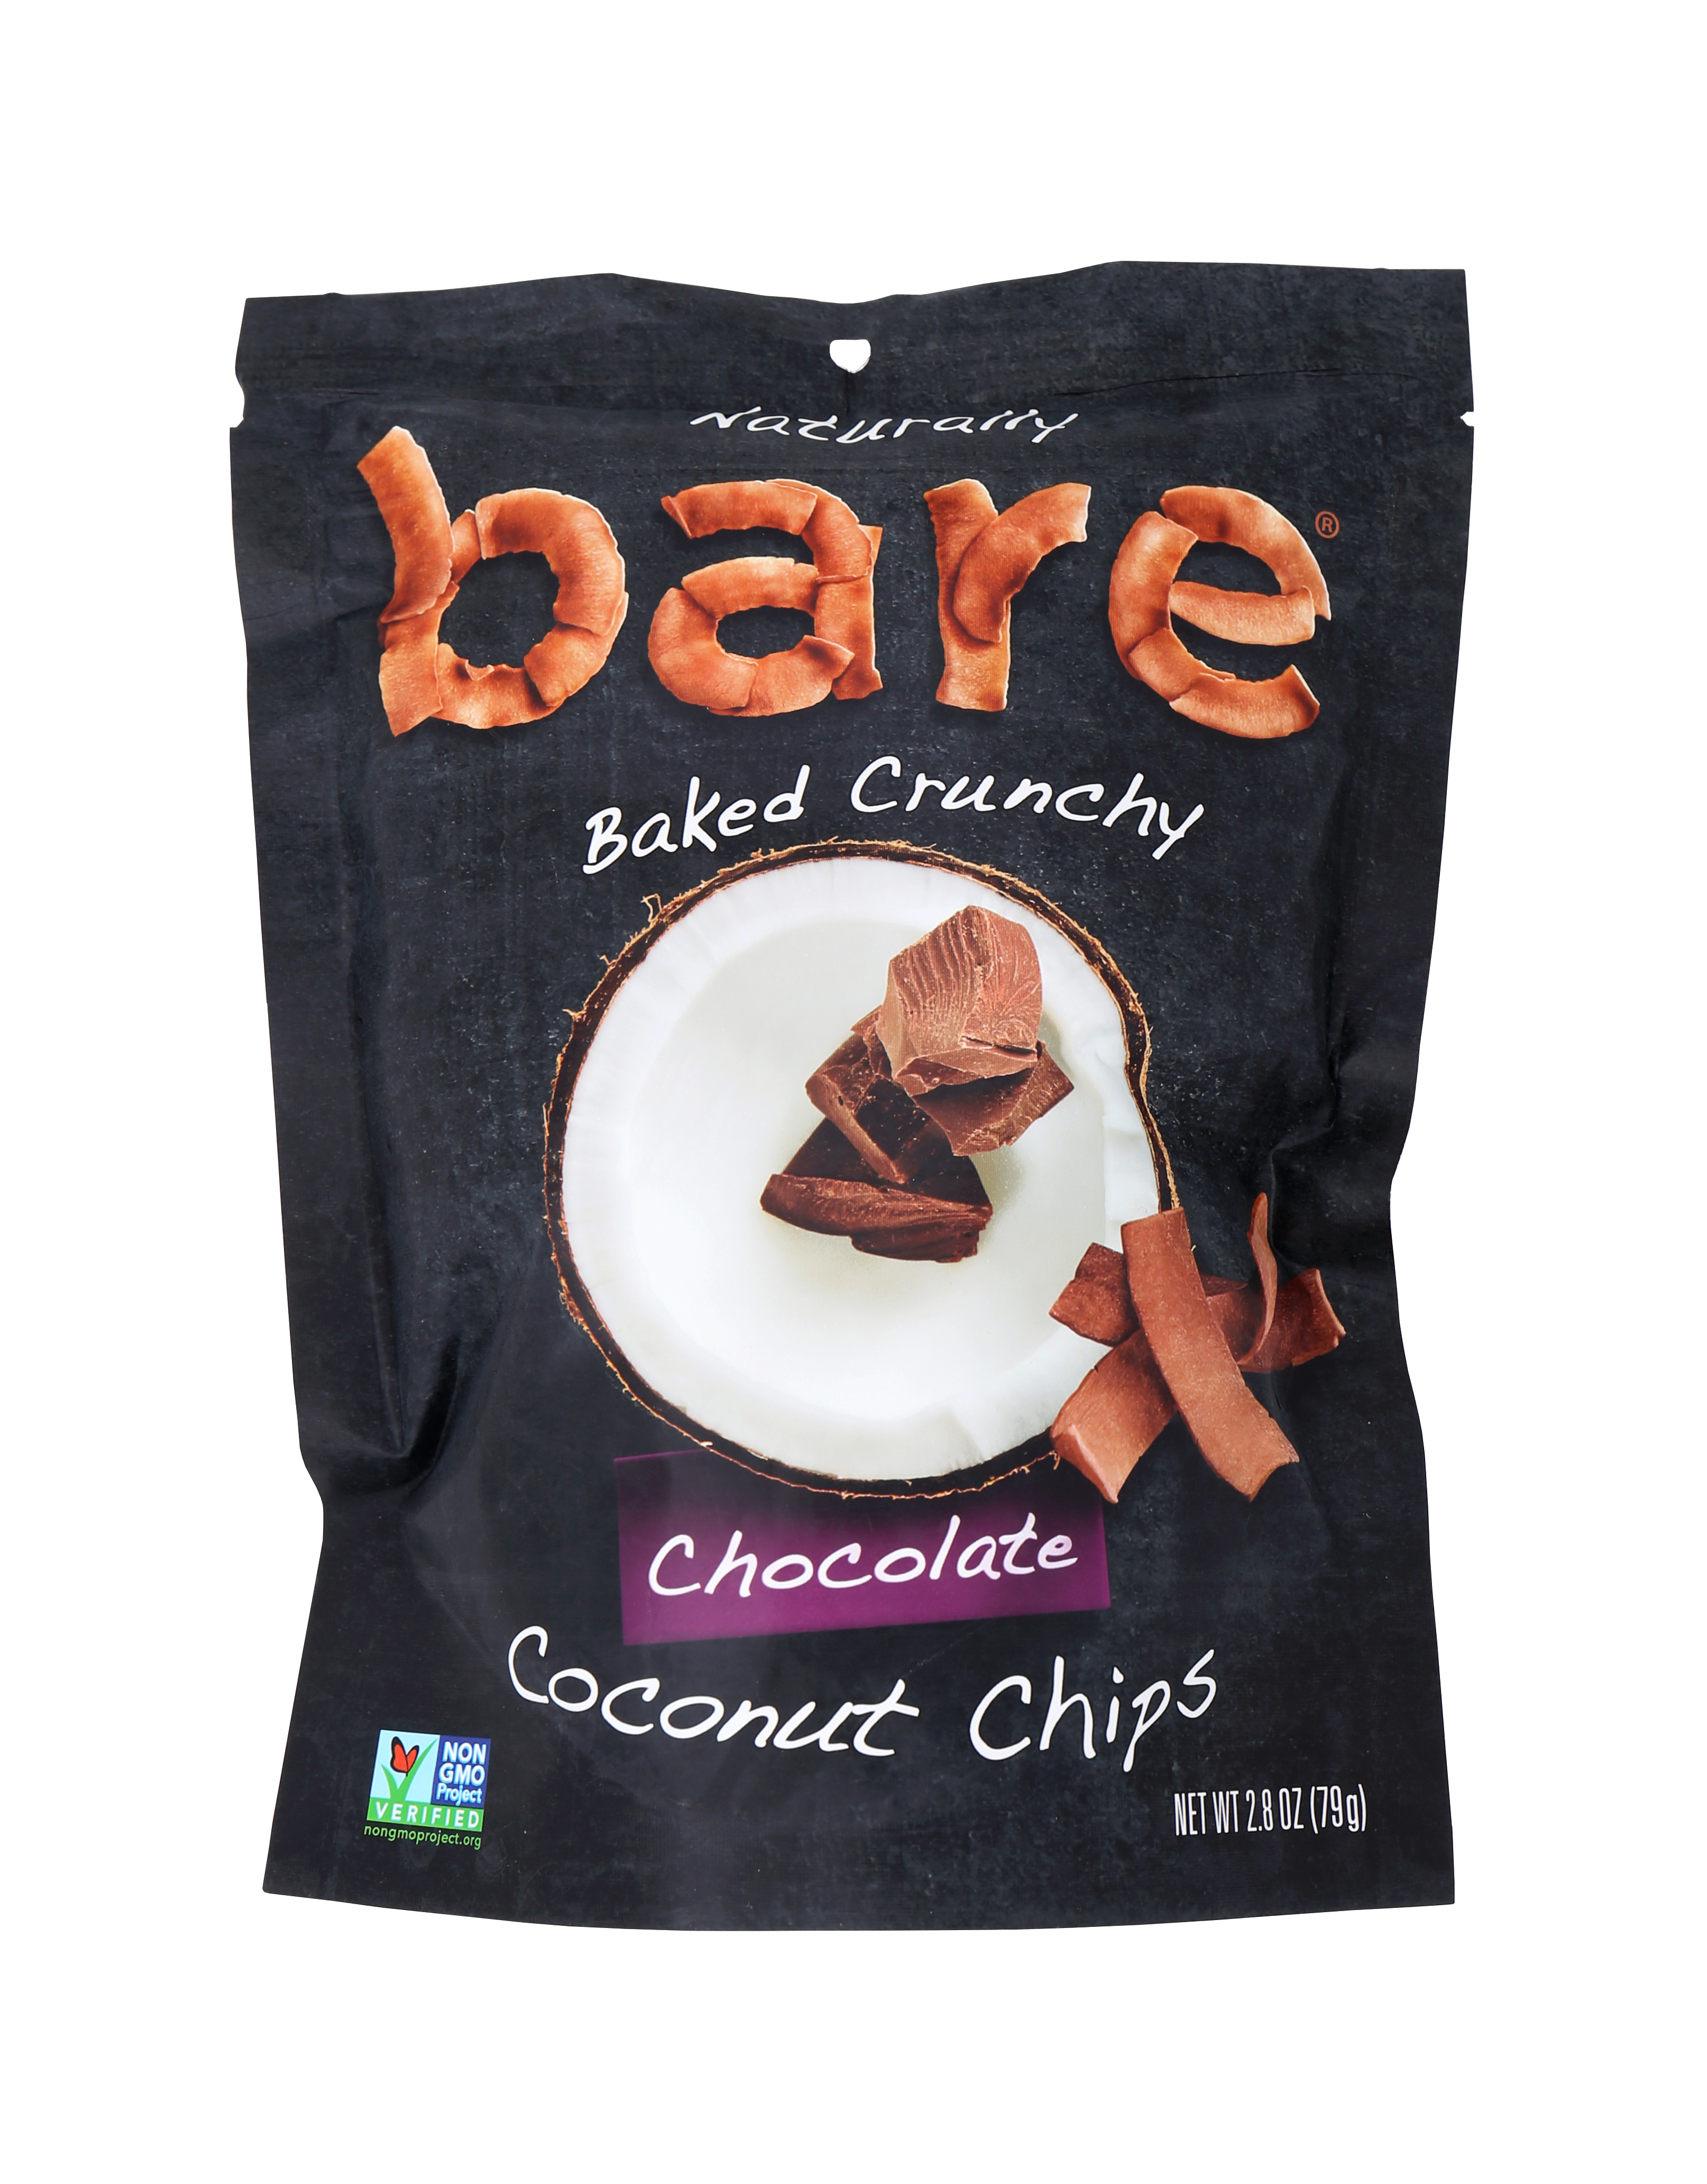 Chocolate Coconut Chips